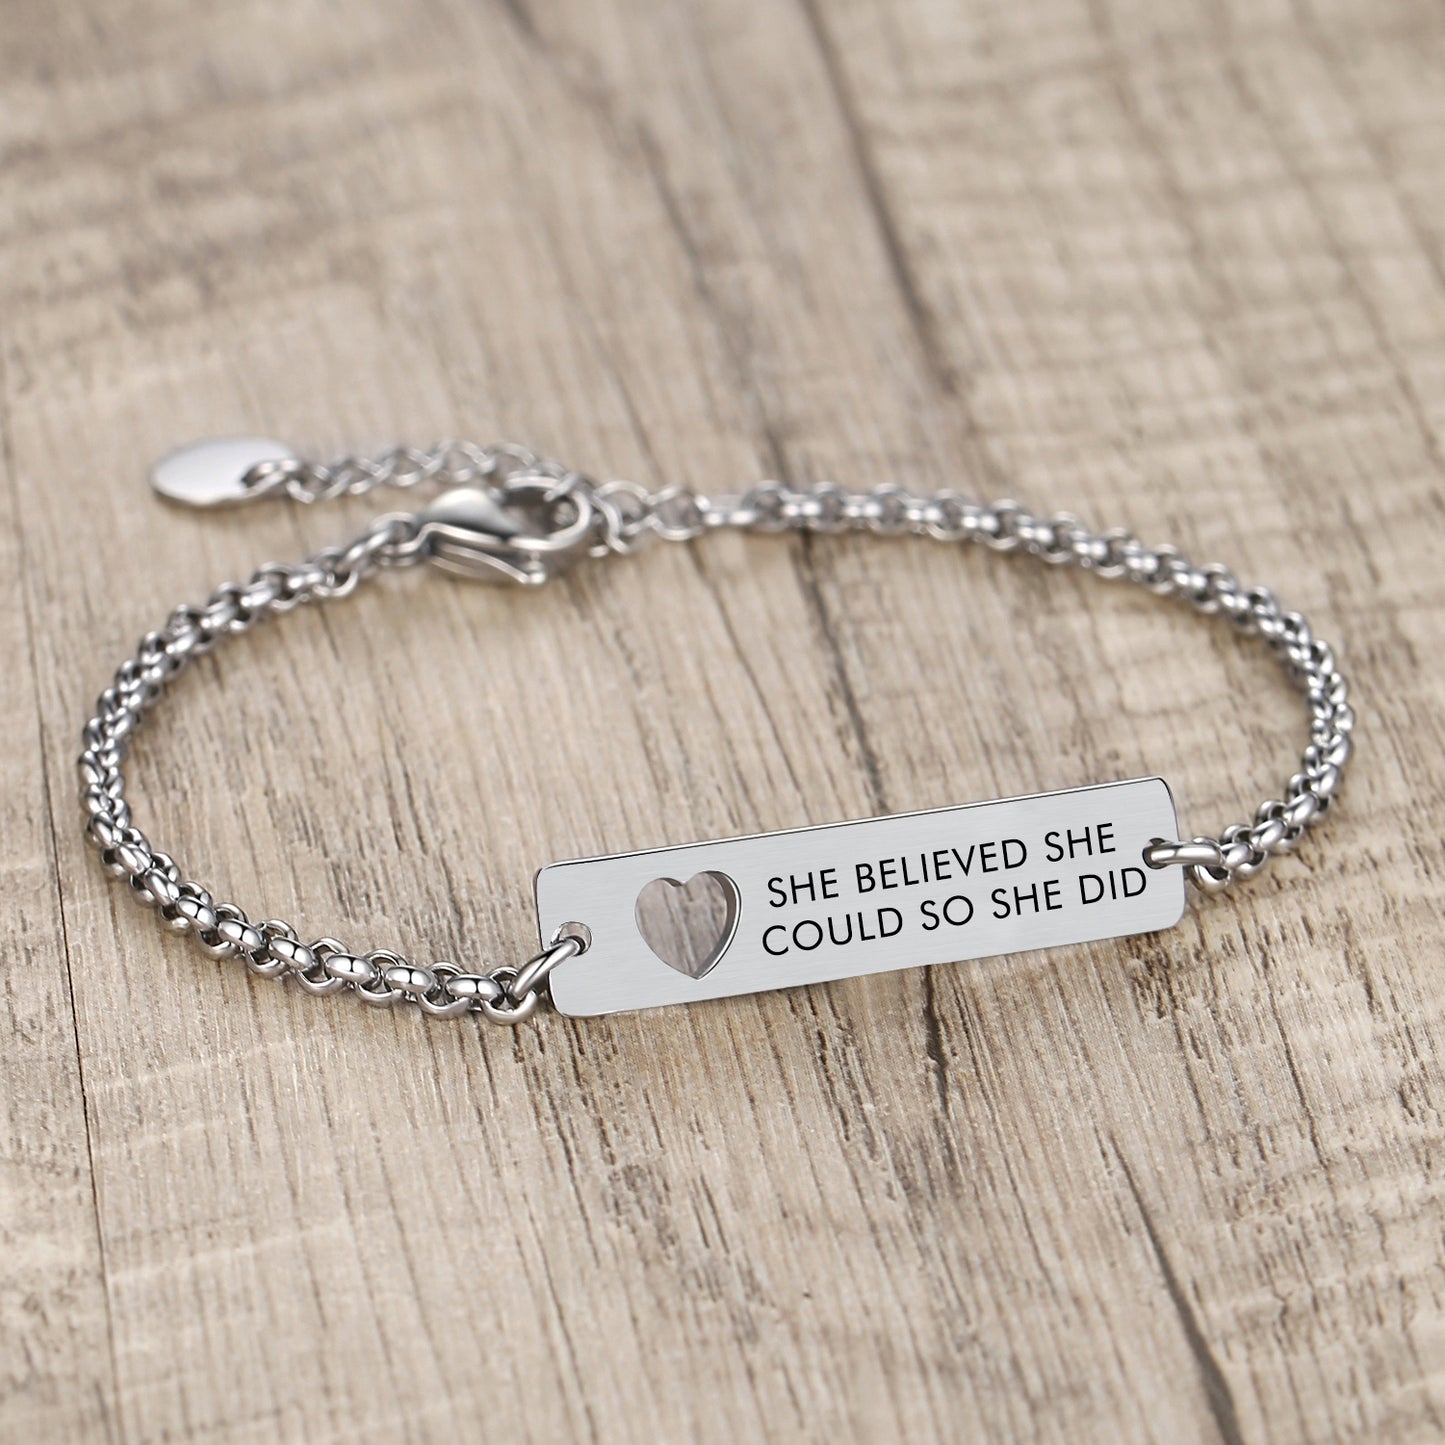 Elegant Quote Bracelets for Women - heart id bracelets-Inspirational Jewelry for Her, Ideal for Christmas Gifts